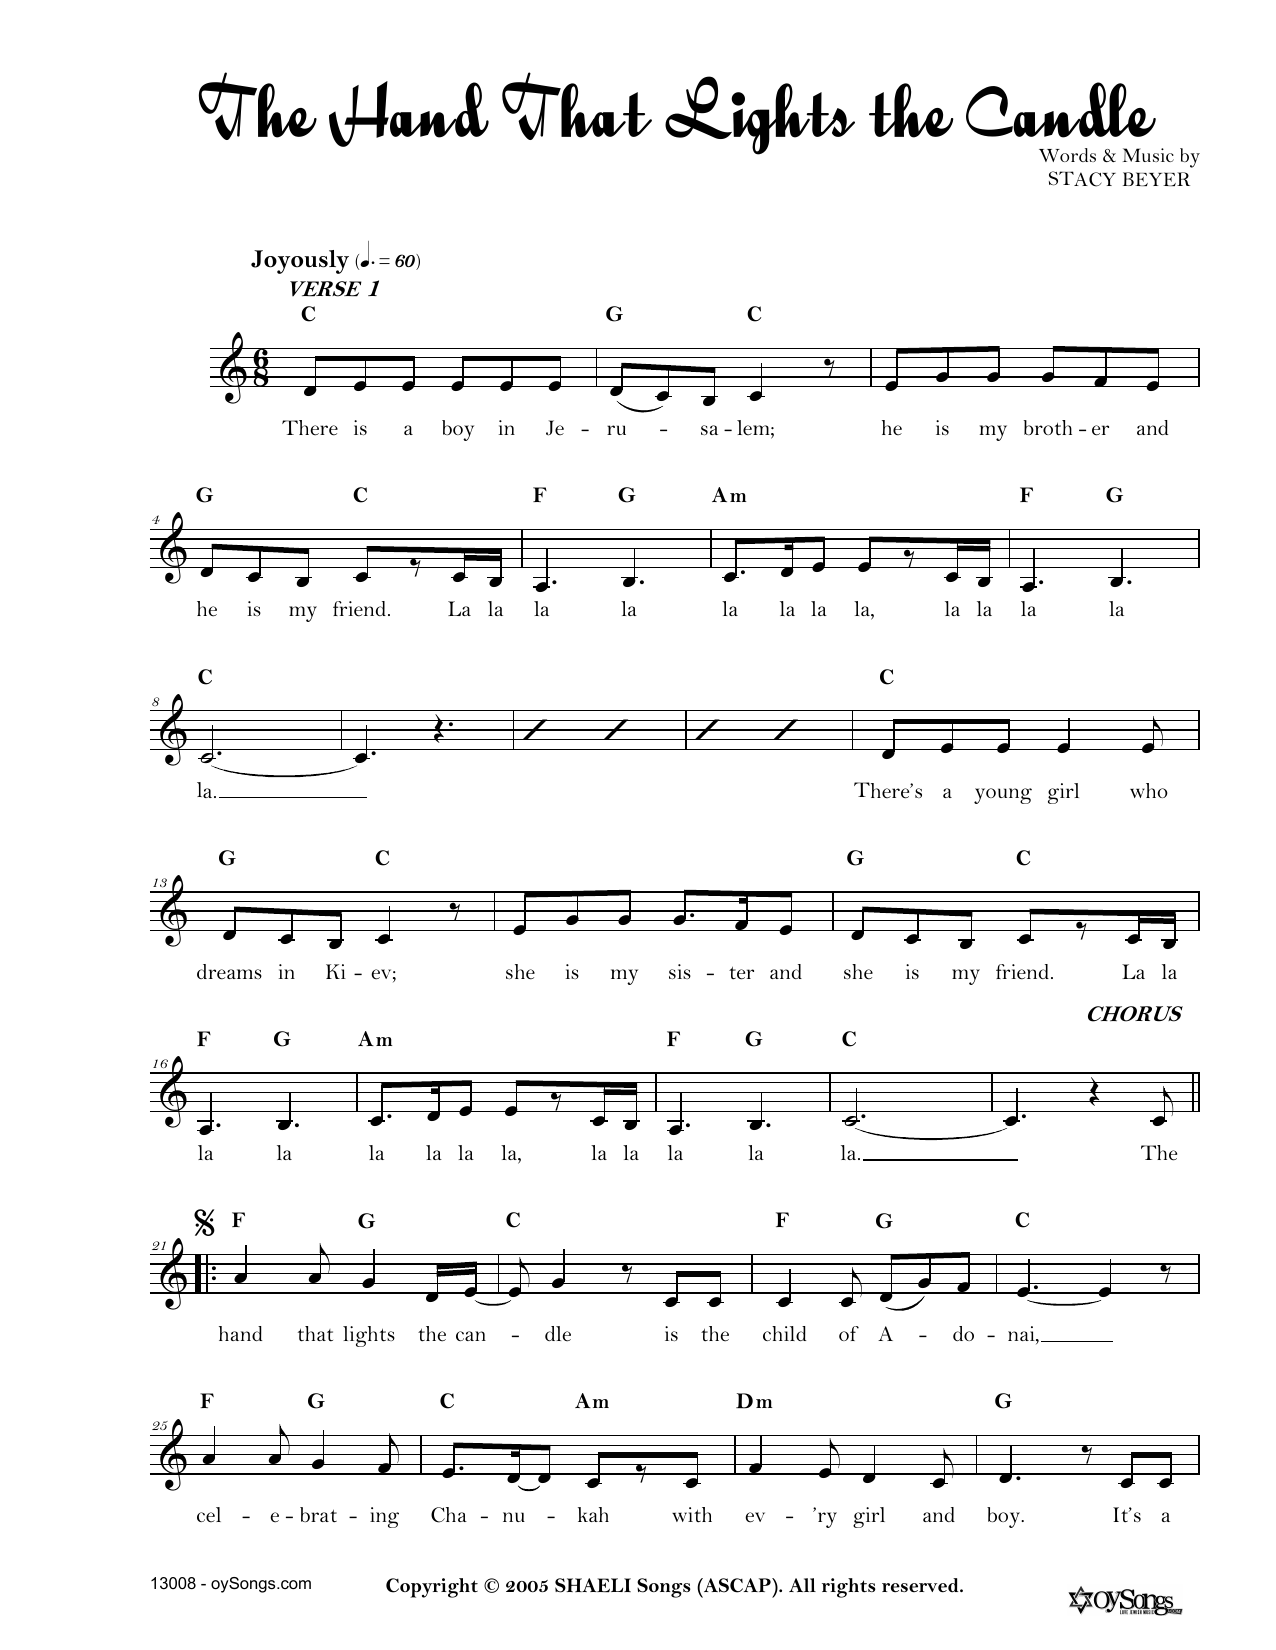 Download Stacy Beyer Hand That Lights the Candle Sheet Music